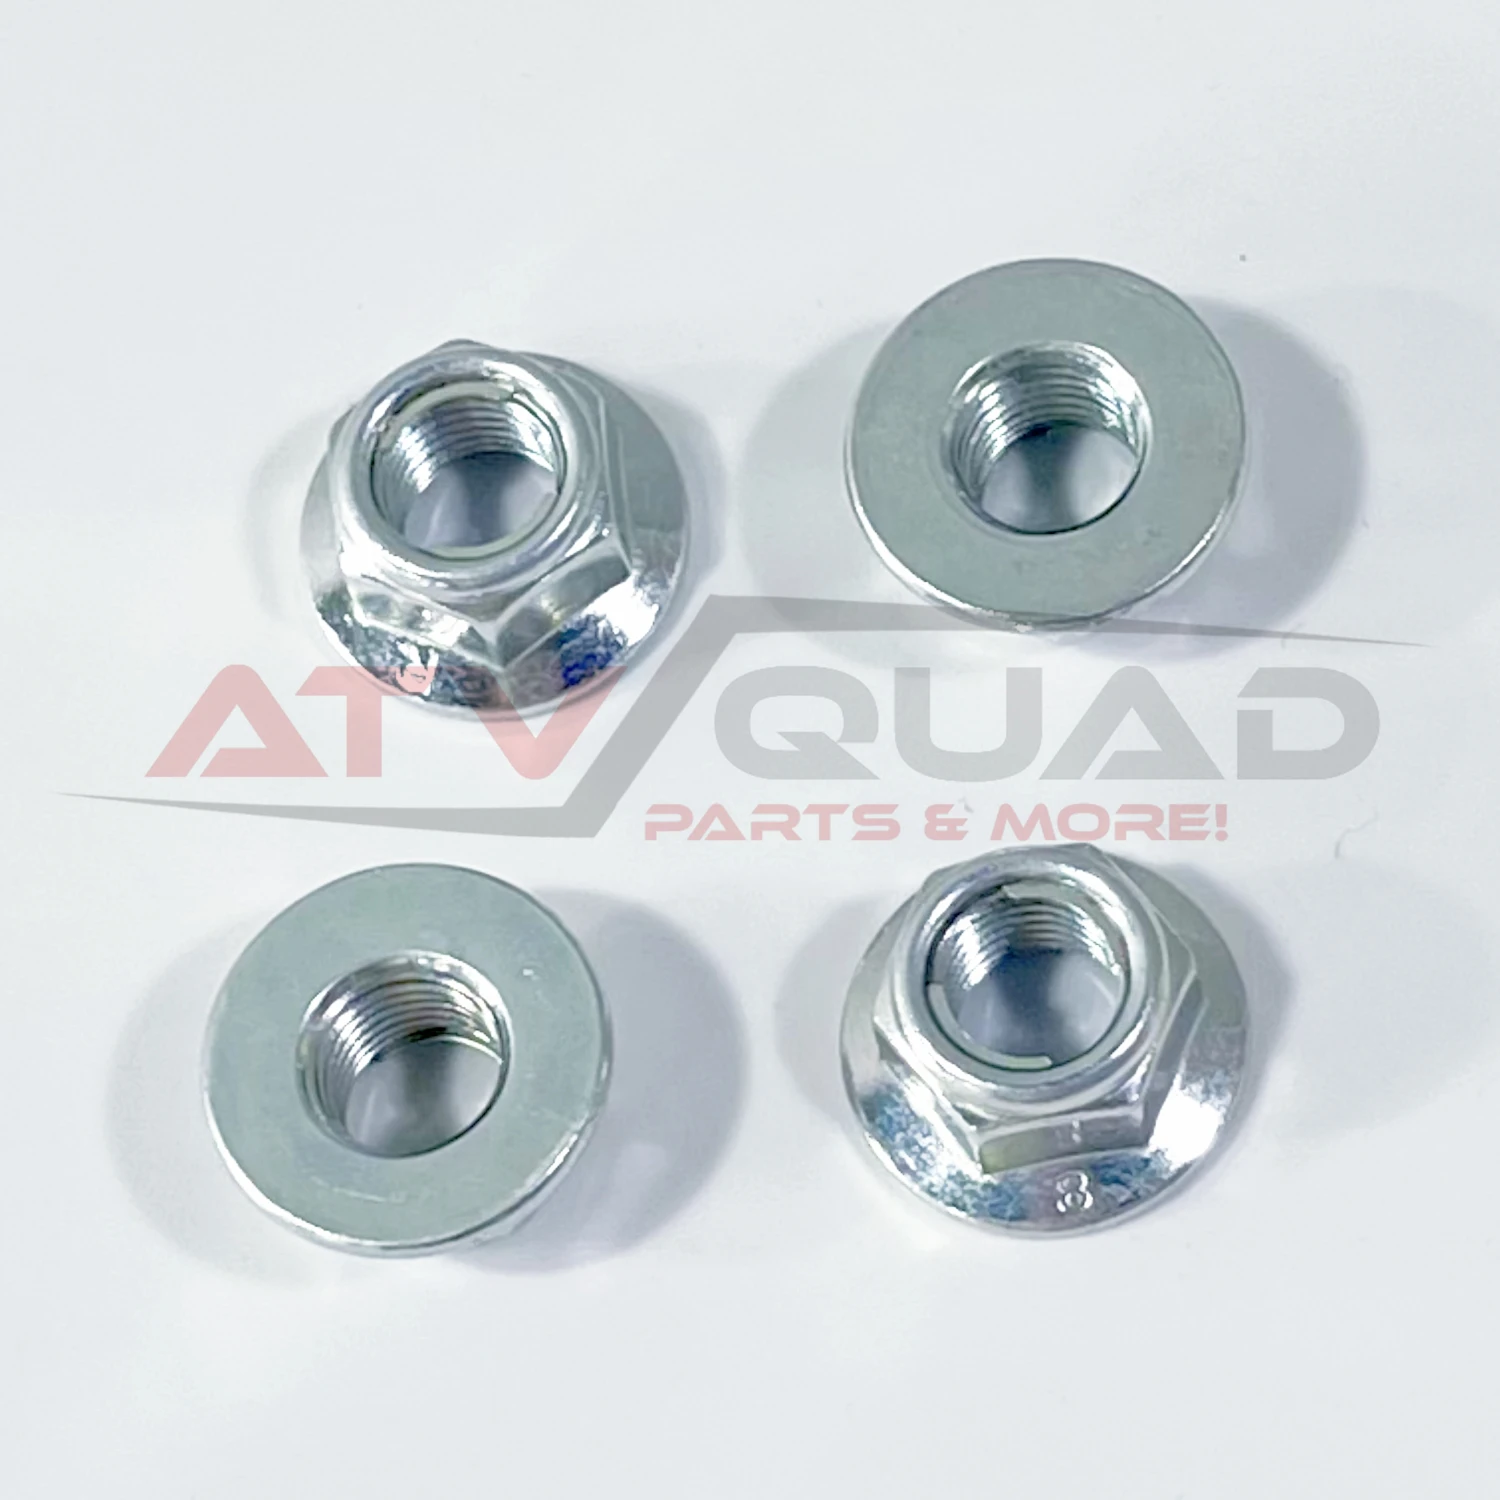 M10X1.25 Nut for CFmoto Scooter Fashion Glory Motorcycle 300SS 300NK 450SS 650 ADVentura 650NK 700CL-X 30204-102810